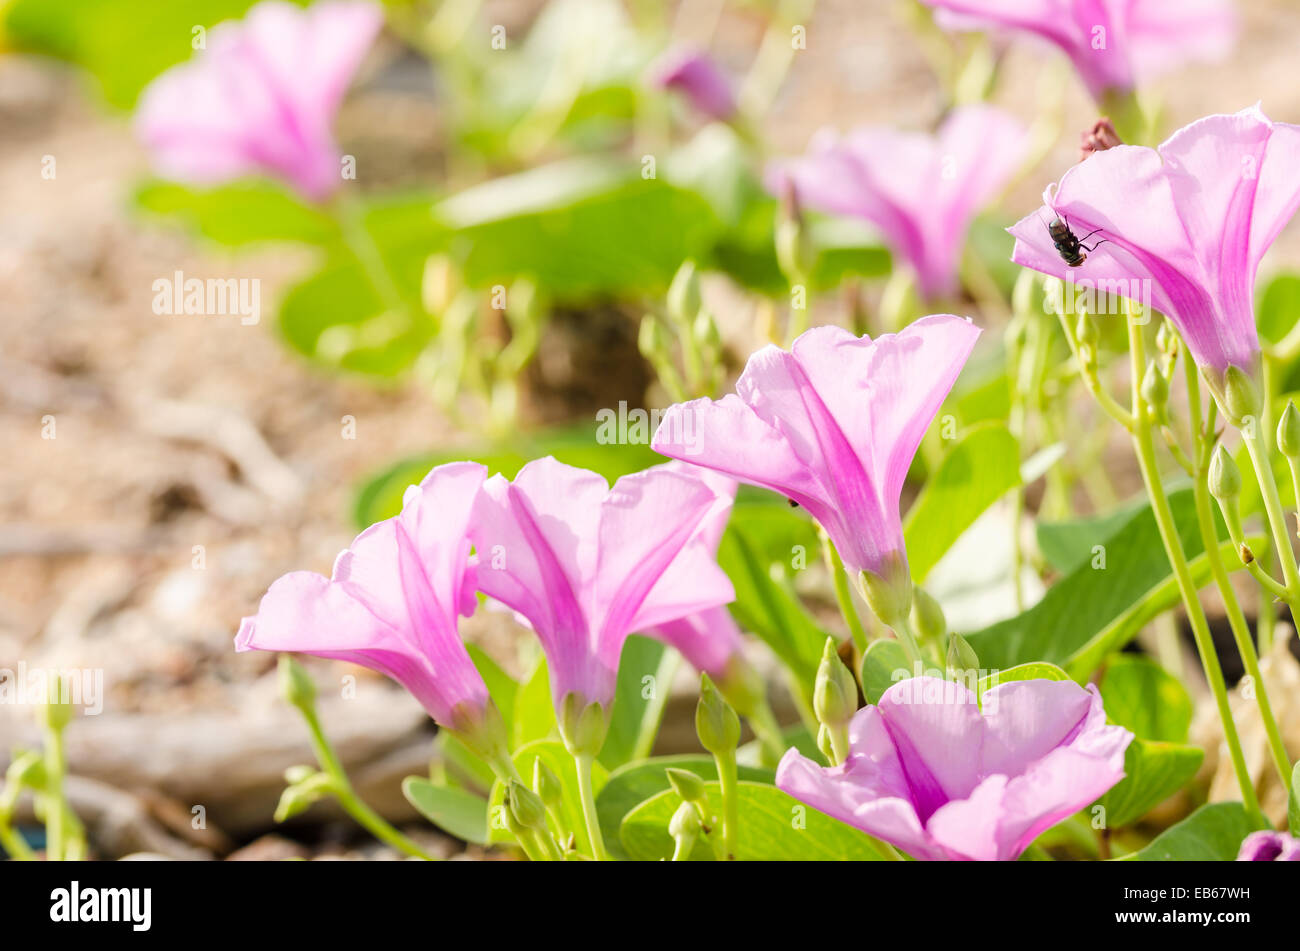 Morning glory or Convolvulaceae flowers or Bindweed Family in the nature or the garden Stock Photo